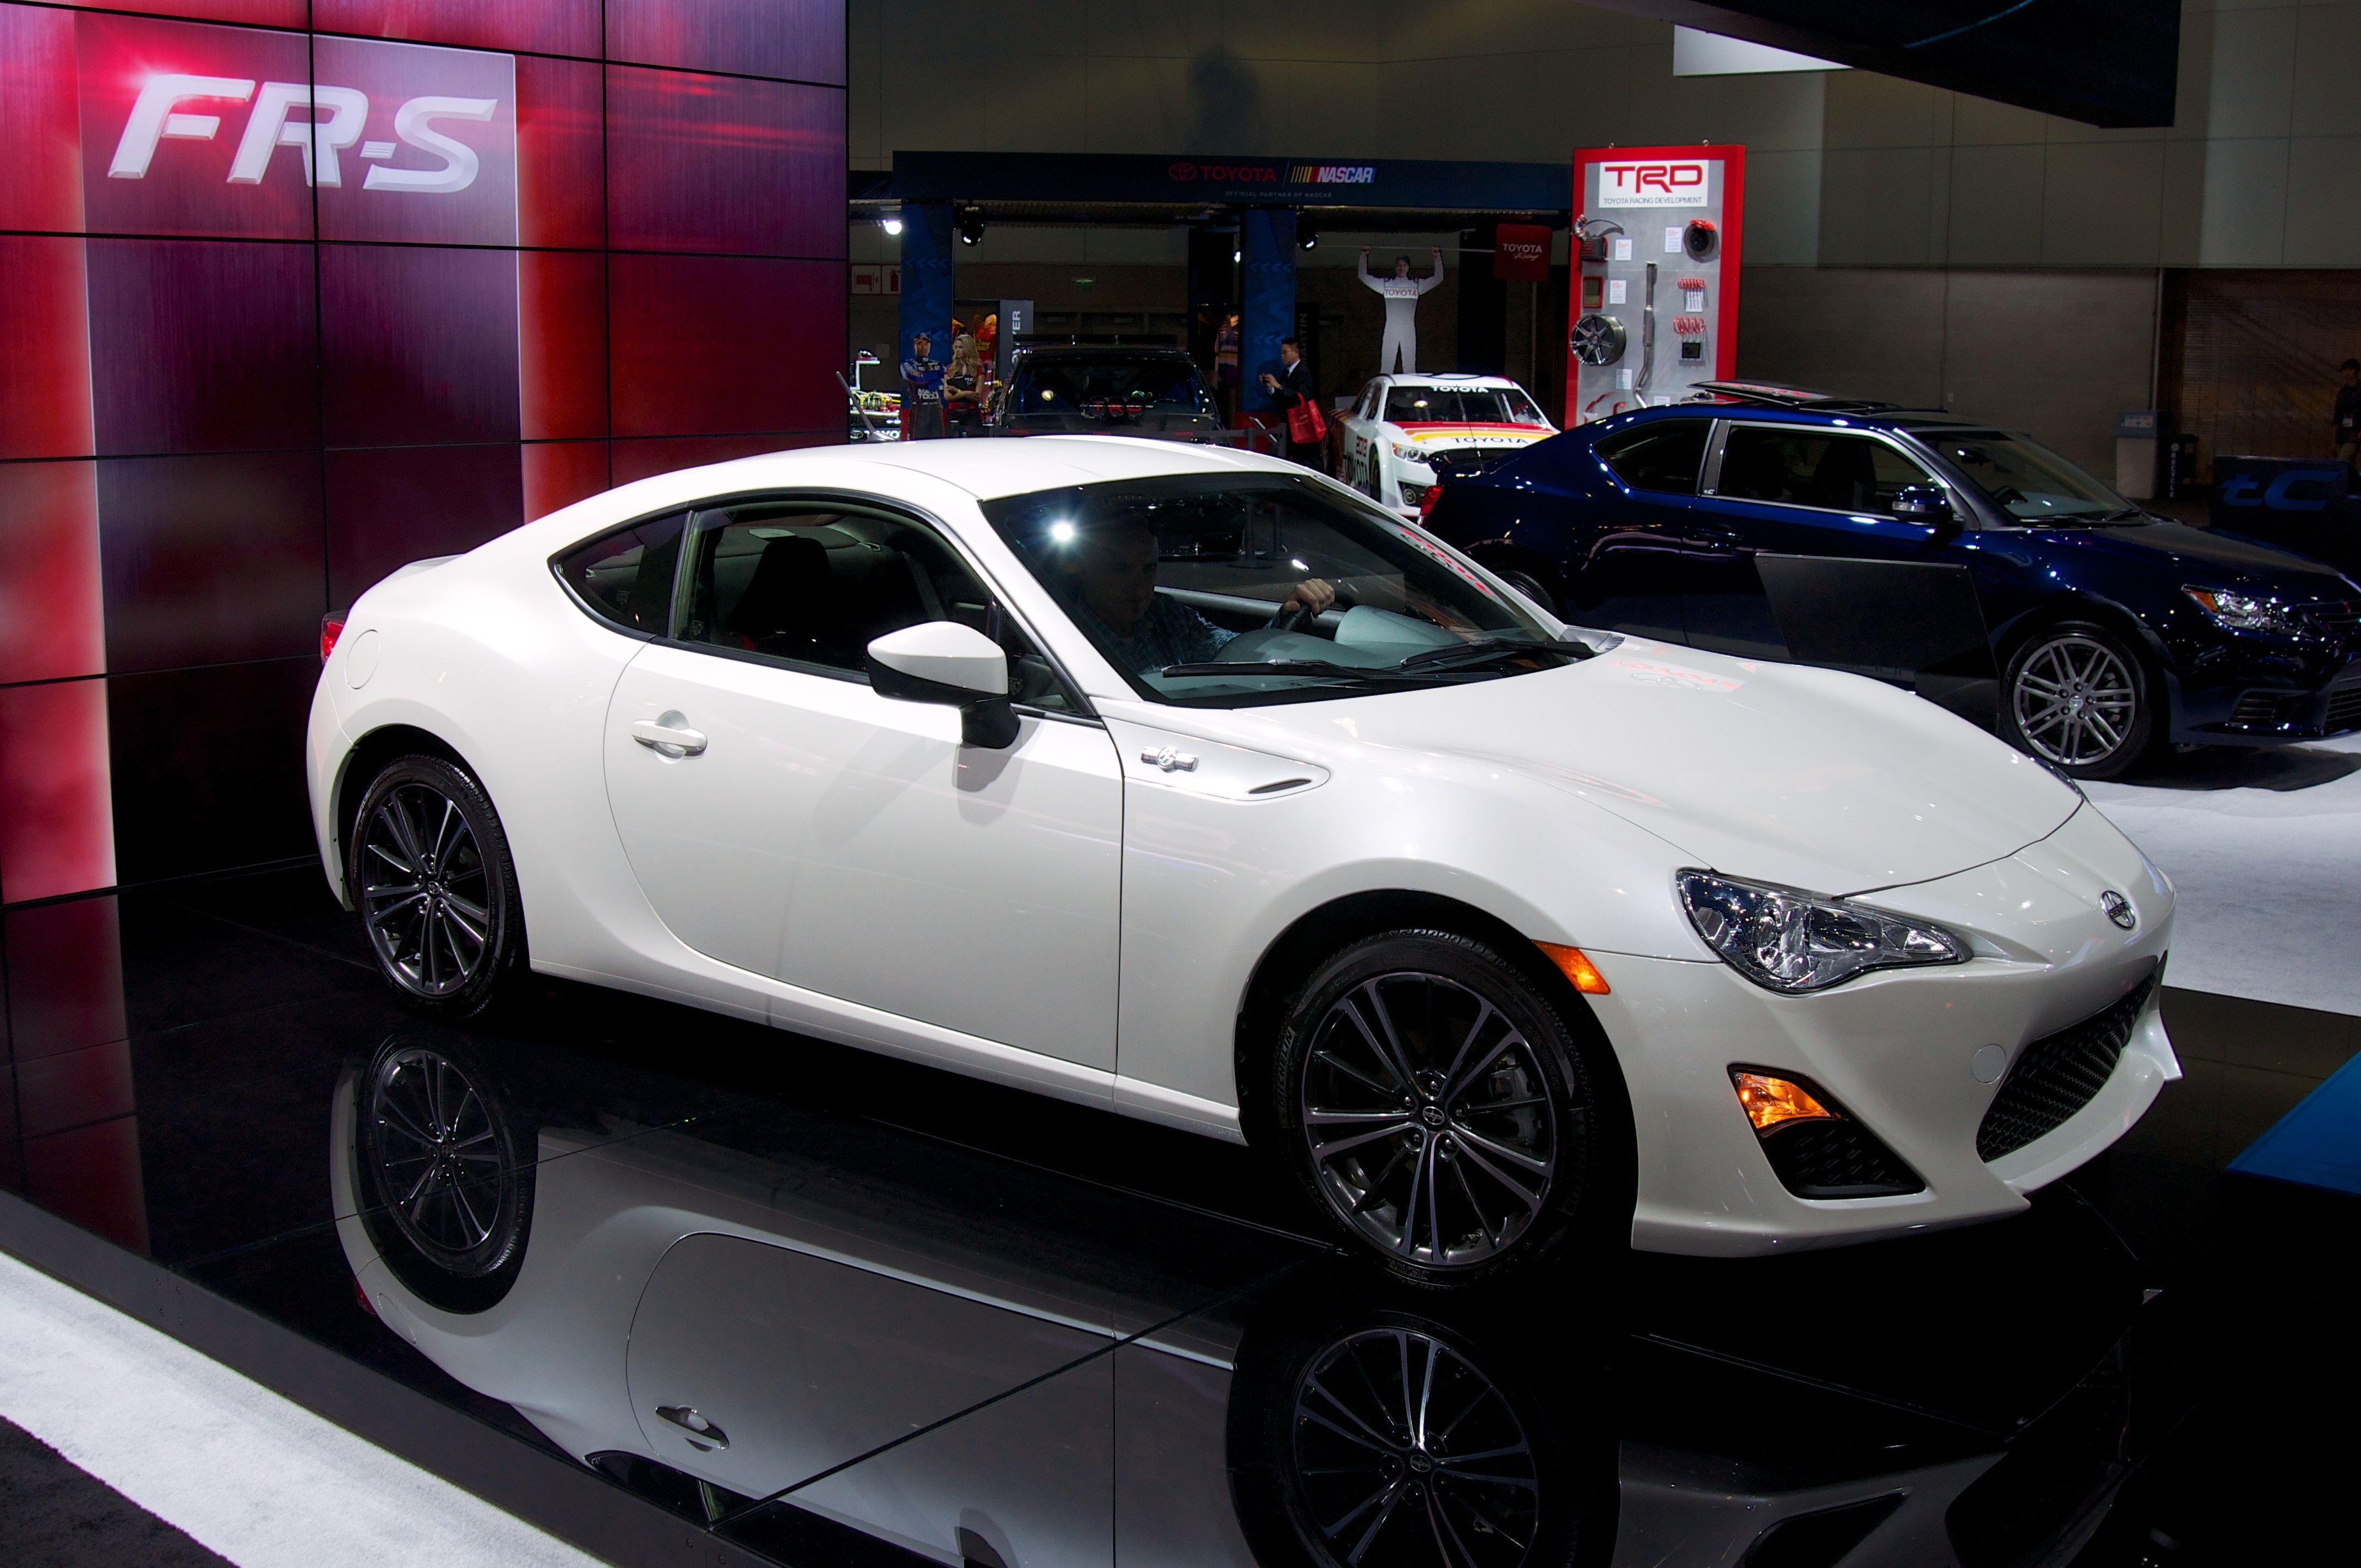 The 2016 Scion FRS.